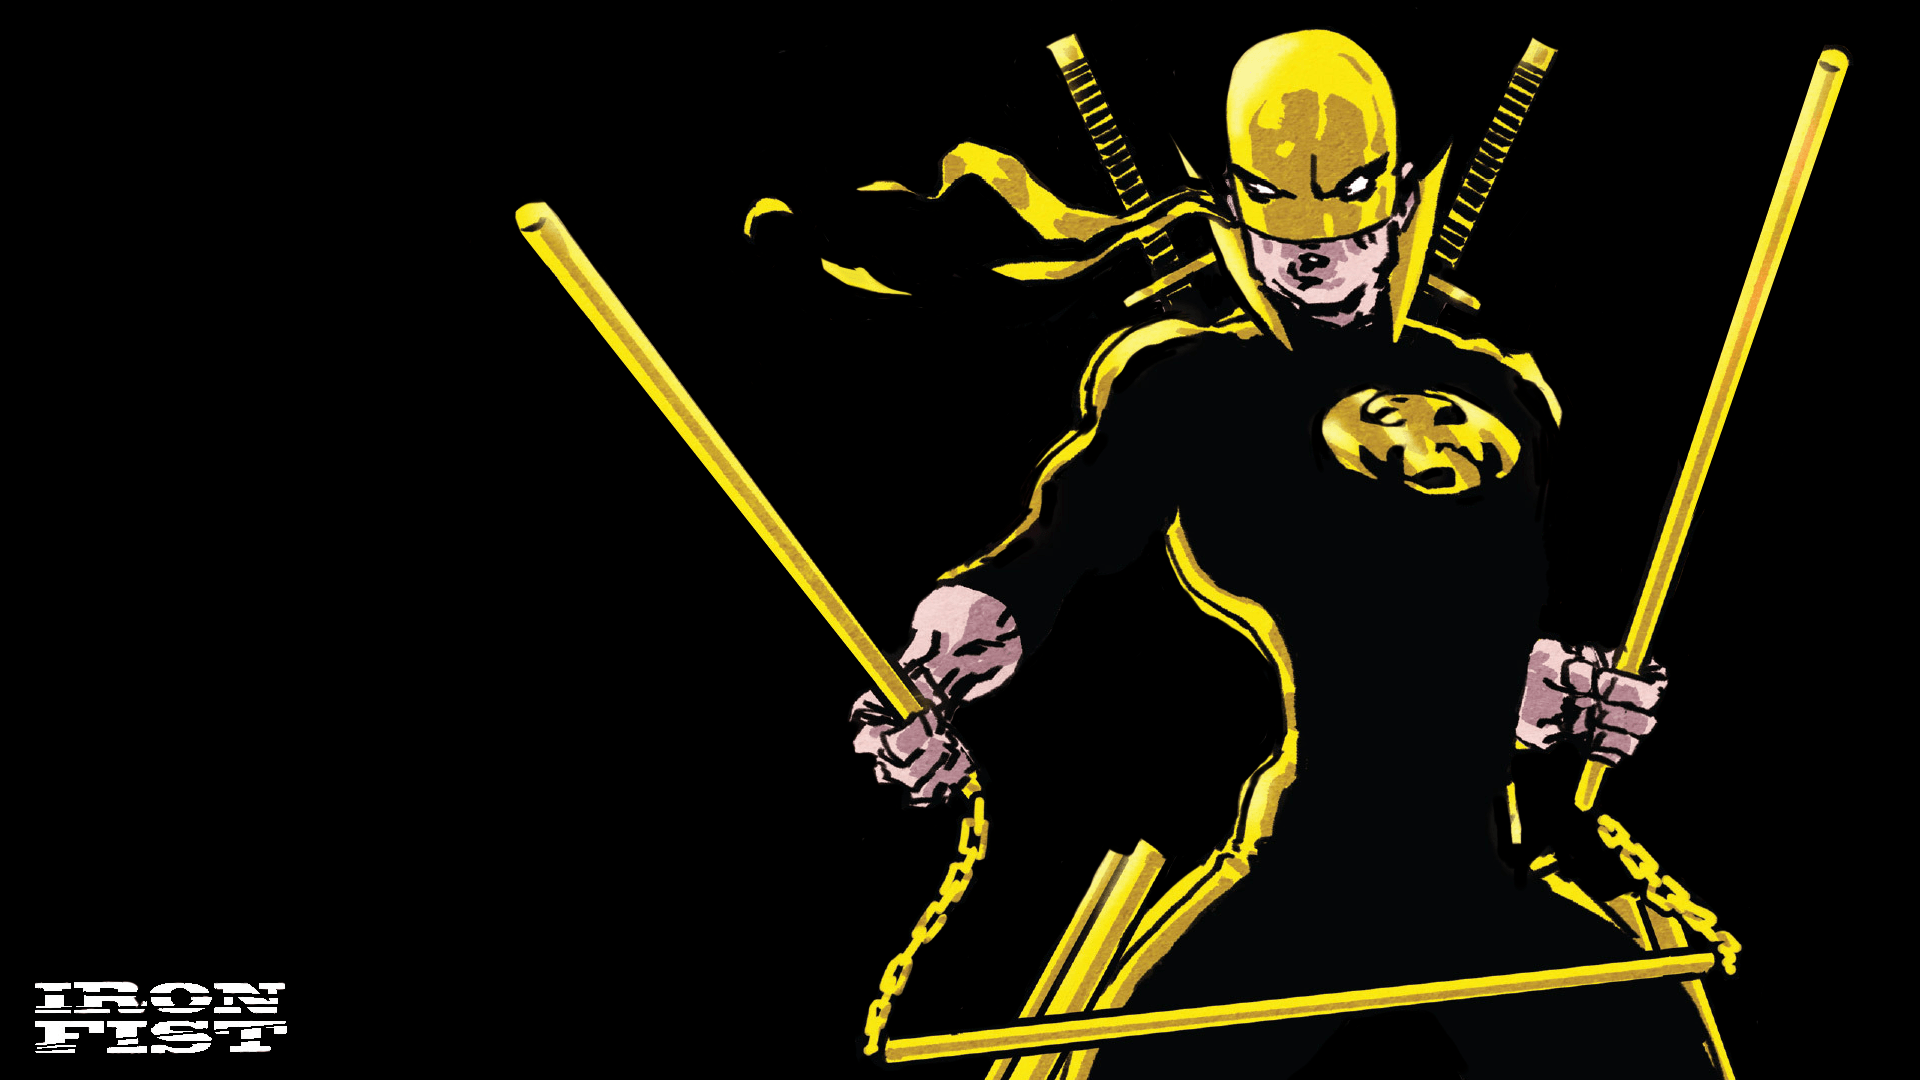 Iron Fist Wallpaper and Background Image